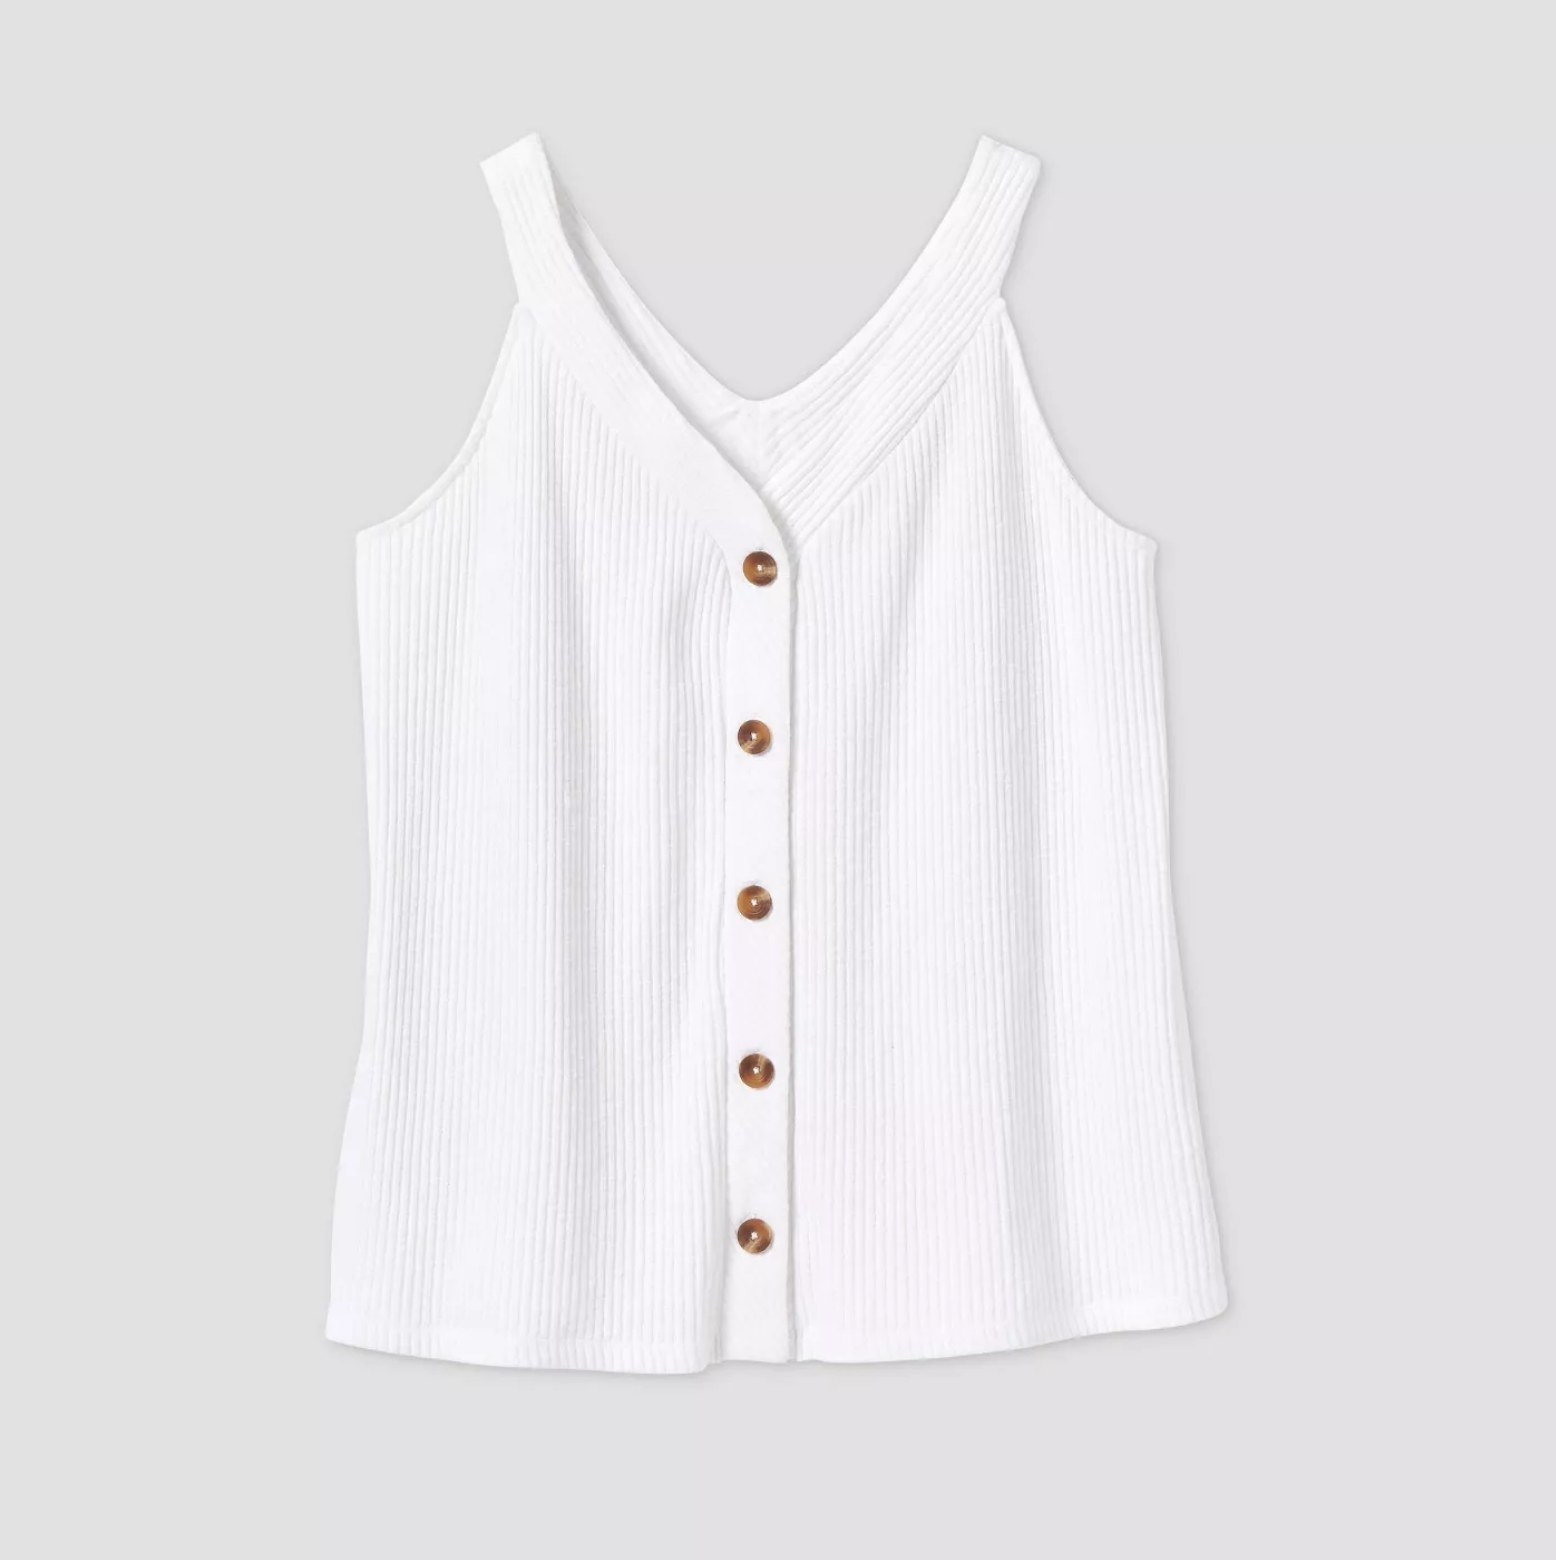 An image of a ribbed white tank top with a v-neck and front buttons